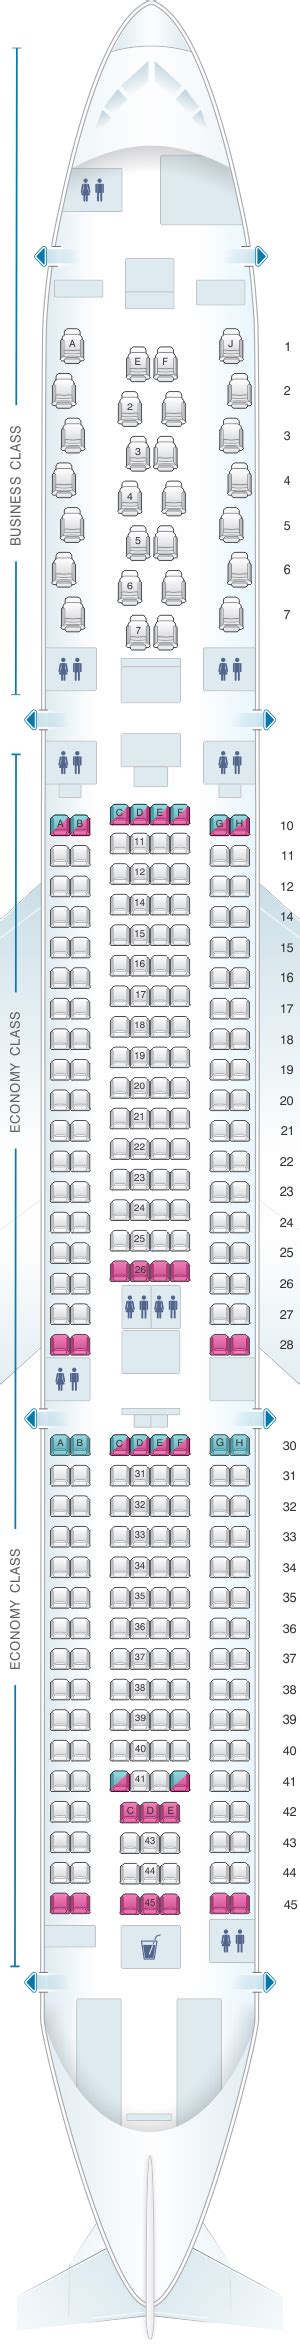 A330 900neo Seat Map Hot Sex Picture